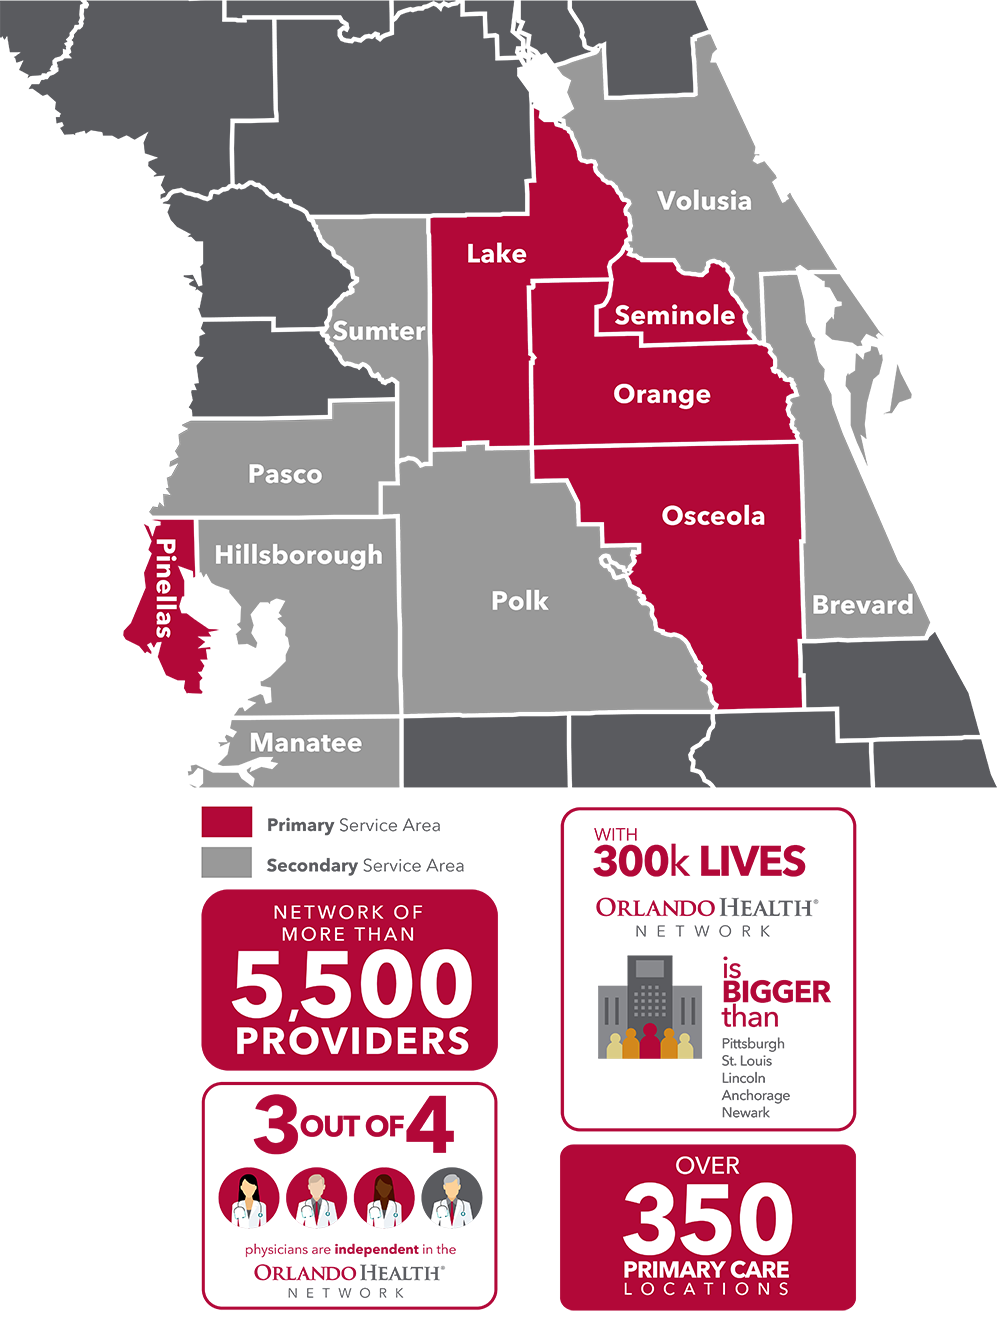 Orlando Health Network by the Numbers Infographic: More than 4,460 aligned providers, Over 212,000 patient lives, Locations across six Central Florida counties, 78,040 2018 Care Gaps closed in MSSP, Florida Blue and Cigna Populations, More than 970 physician practices 